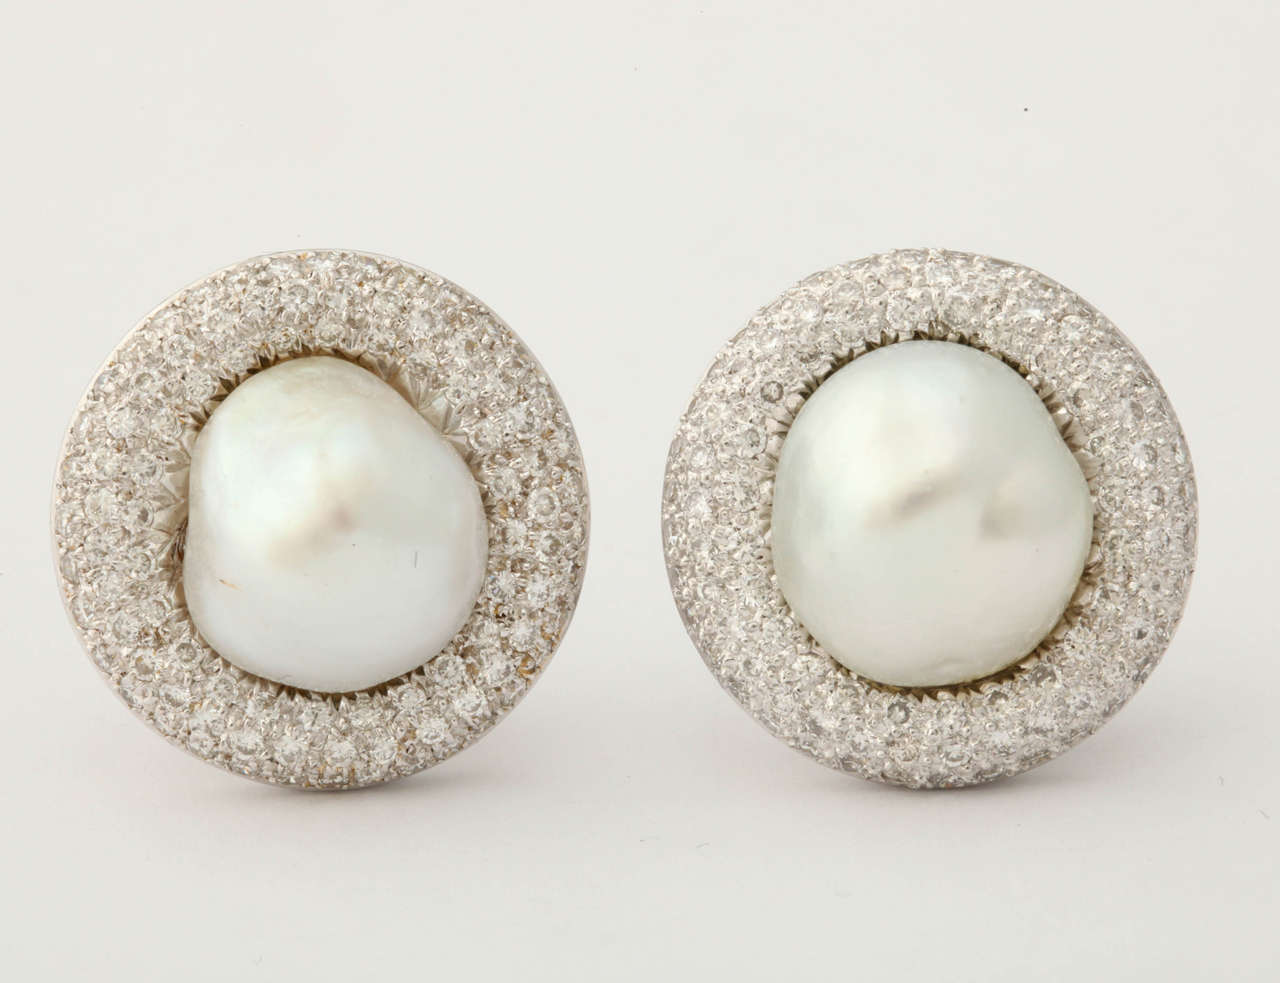 One Pair Of Gorgeous 18kt White Gold Clip On Earrings With Posts NOTE: Posts May Be Removed If Not Needed. Earrings Are Embellished With 2 {12} MM Large High Lustre Baroque Pearls in Center & Surrounded by Approximately 4 Carats Of Full Cut